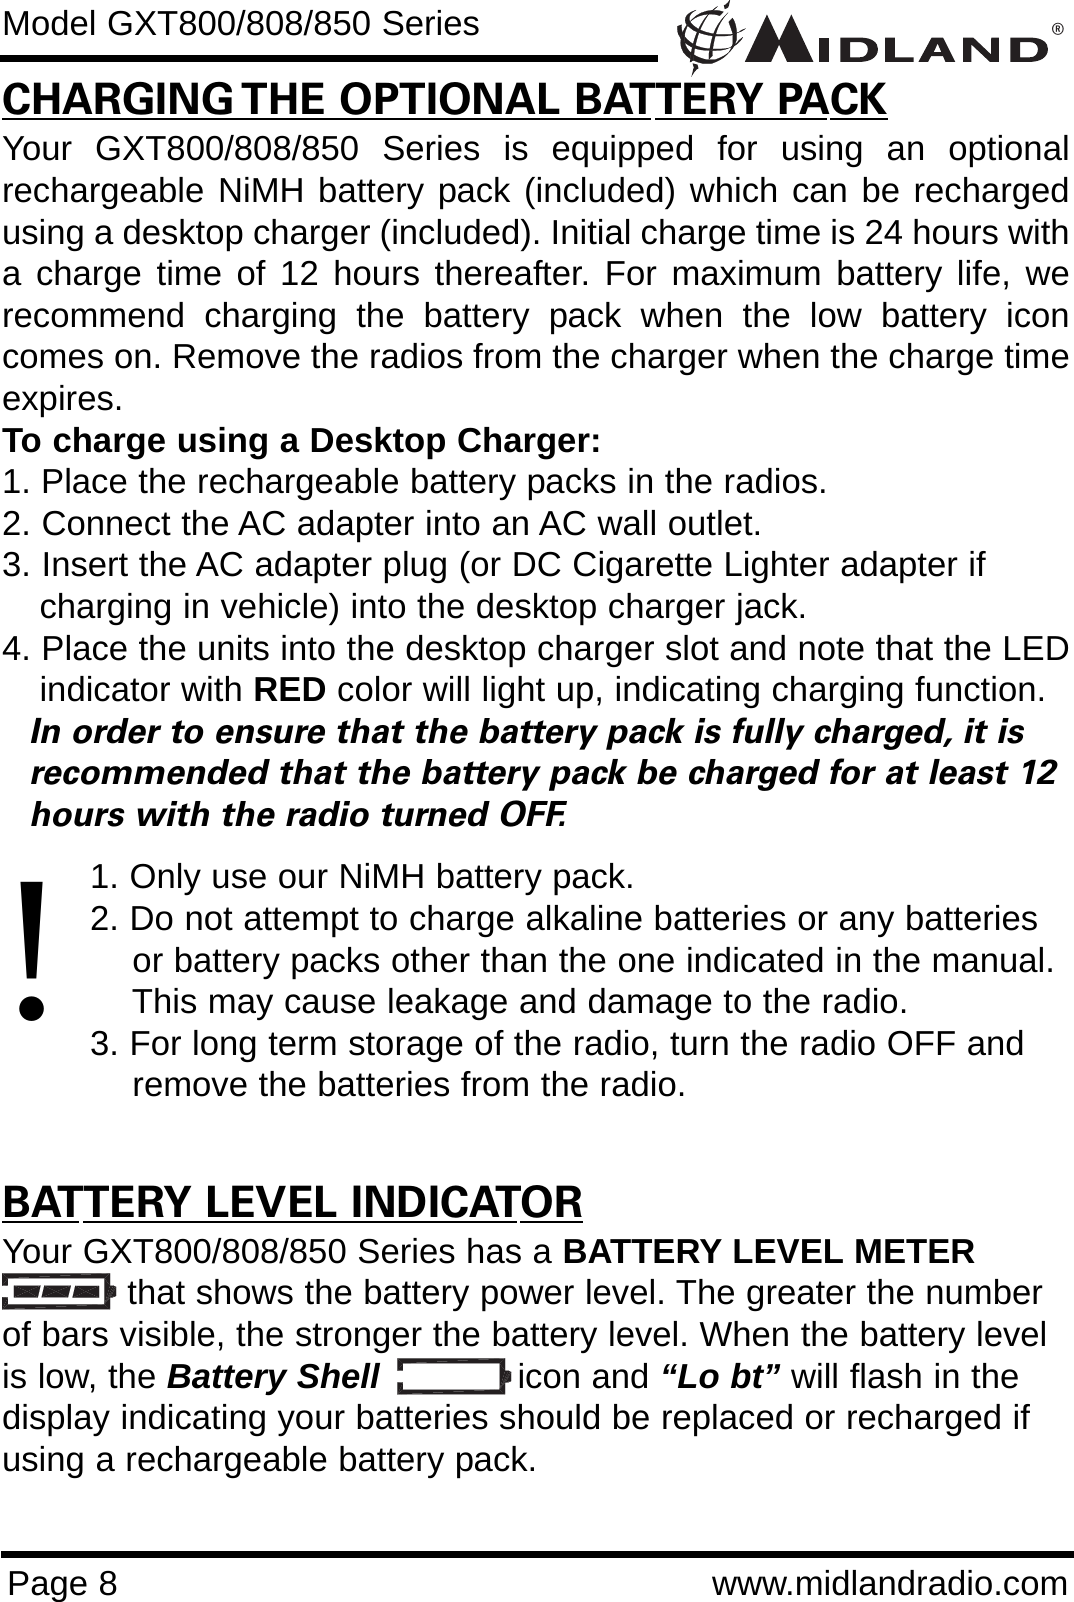 ®Page 8 www.midlandradio.comCHARGING THE OPTIONAL BATTERY PACKYour GXT800/808/850 Series is equipped for using an optionalrechargeable NiMH battery pack (included) which can be rechargedusing a desktop charger (included). Initial charge time is 24 hours witha charge time of 12 hours thereafter. For maximum battery life, werecommend charging the battery pack when the low battery iconcomes on. Remove the radios from the charger when the charge timeexpires.To charge using a Desktop Charger:1. Place the rechargeable battery packs in the radios.2. Connect the AC adapter into an AC wall outlet.3. Insert the AC adapter plug (or DC Cigarette Lighter adapter if    charging in vehicle) into the desktop charger jack.4. Place the units into the desktop charger slot and note that the LEDindicator with RED color will light up, indicating charging function. In order to ensure that the battery pack is fully charged, it is  recommended that the battery pack be charged for at least 12 hours with the radio turned OFF.1. Only use our NiMH battery pack.2. Do not attempt to charge alkaline batteries or any batteries or battery packs other than the one indicated in the manual. This may cause leakage and damage to the radio.3. For long term storage of the radio, turn the radio OFF and remove the batteries from the radio.BATTERY LEVEL INDICATORYour GXT800/808/850 Series has a BATTERY LEVEL METERthat shows the battery power level. The greater the numberof bars visible, the stronger the battery level. When the battery levelis low, the Battery Shell icon and “Lo bt” will flash in thedisplay indicating your batteries should be replaced or recharged ifusing a rechargeable battery pack.Model GXT800/808/850 Series!